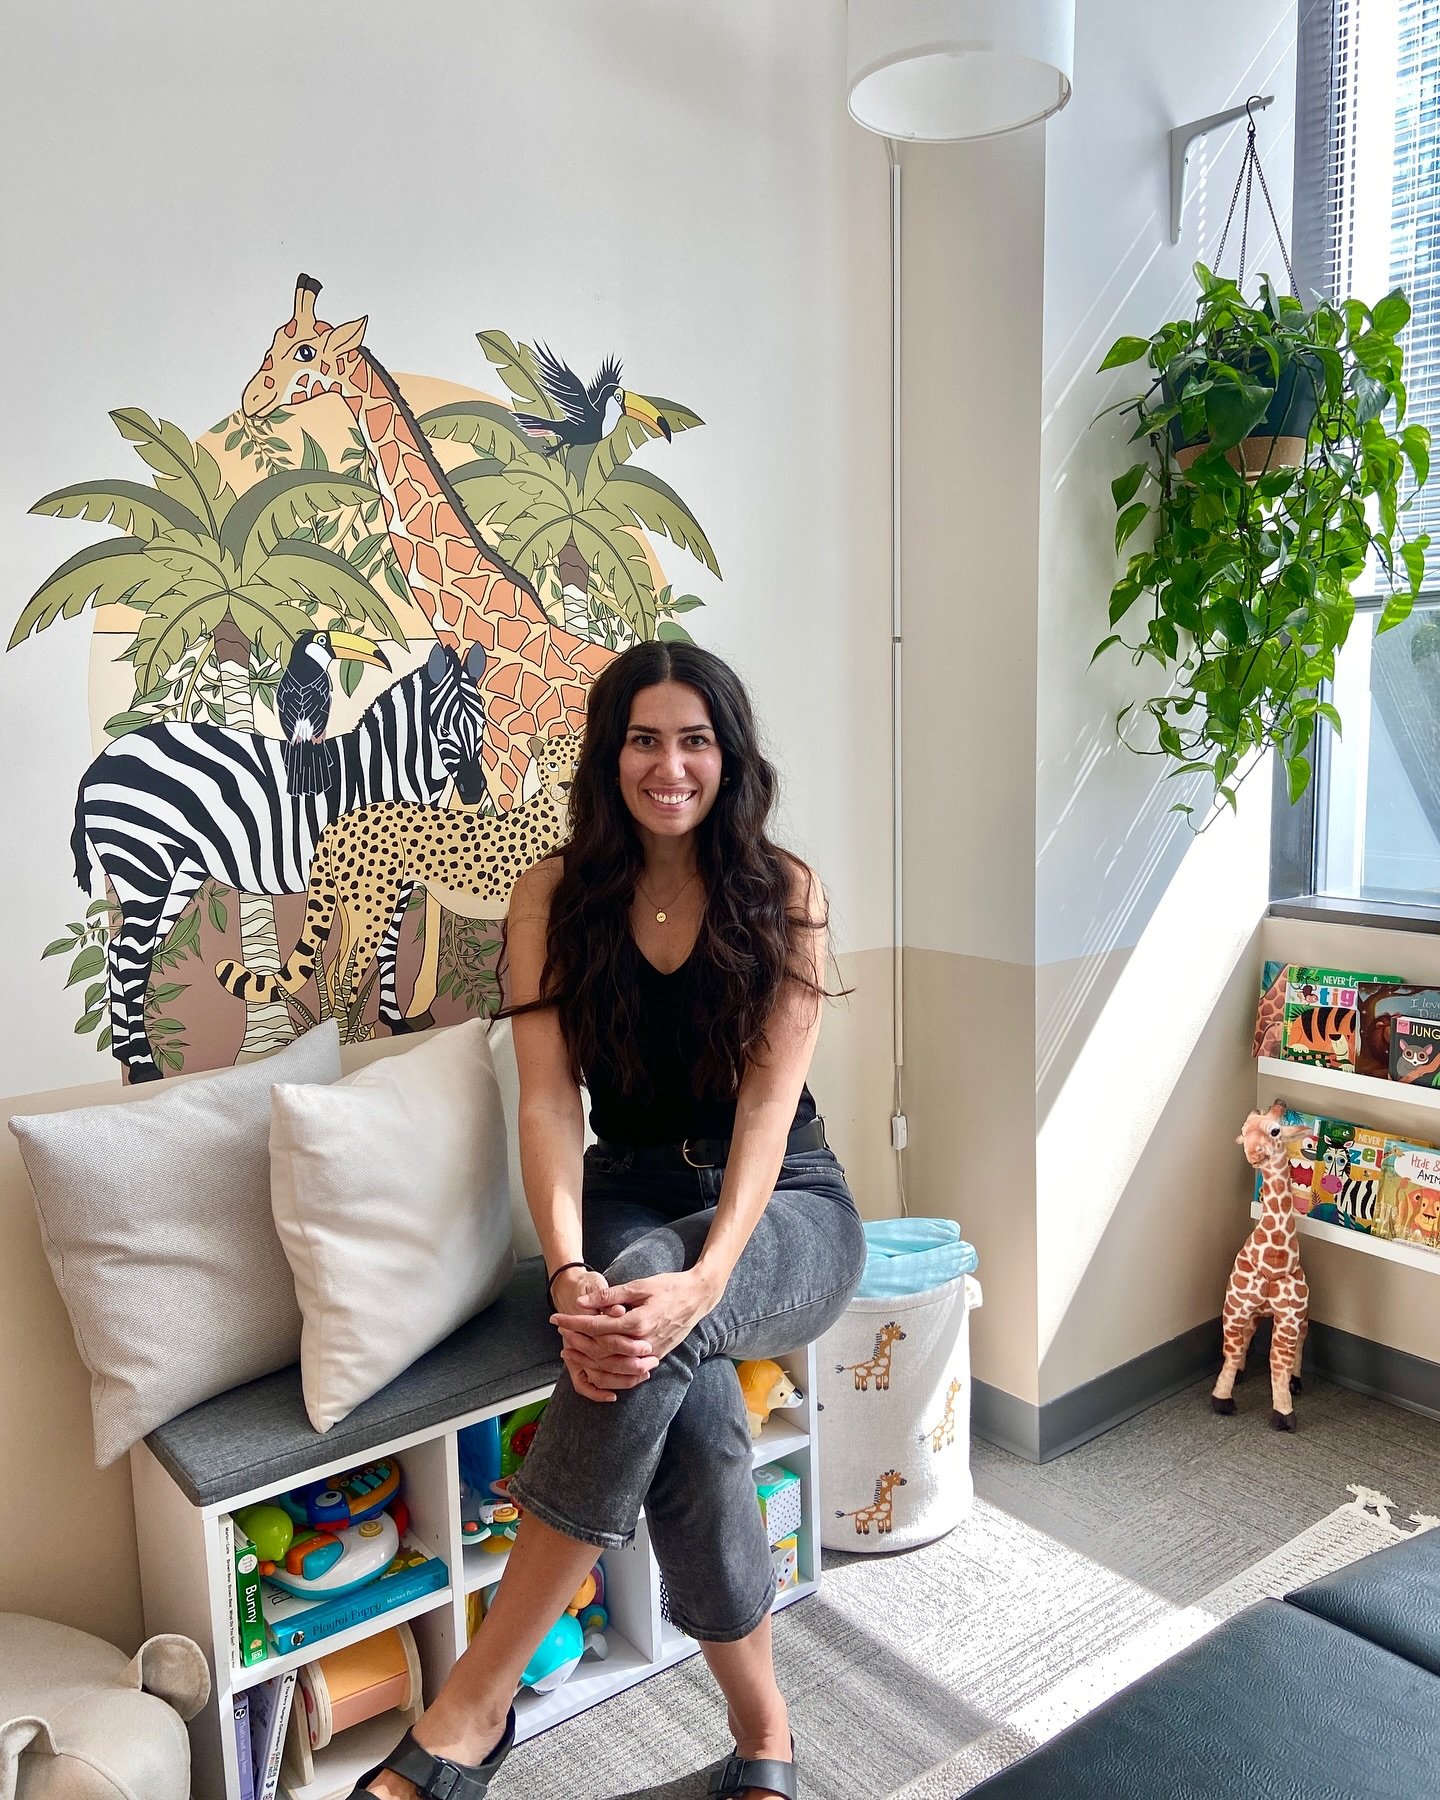 🧸 Hi! I&rsquo;m Dr. Jenine - a prenatal, postpartum and pediatric chiropractor in Vancouver &amp; Burnaby, BC. I help families with little ones feel confident navigating milestones, and have a positive pregnancy and postpartum experience through inf